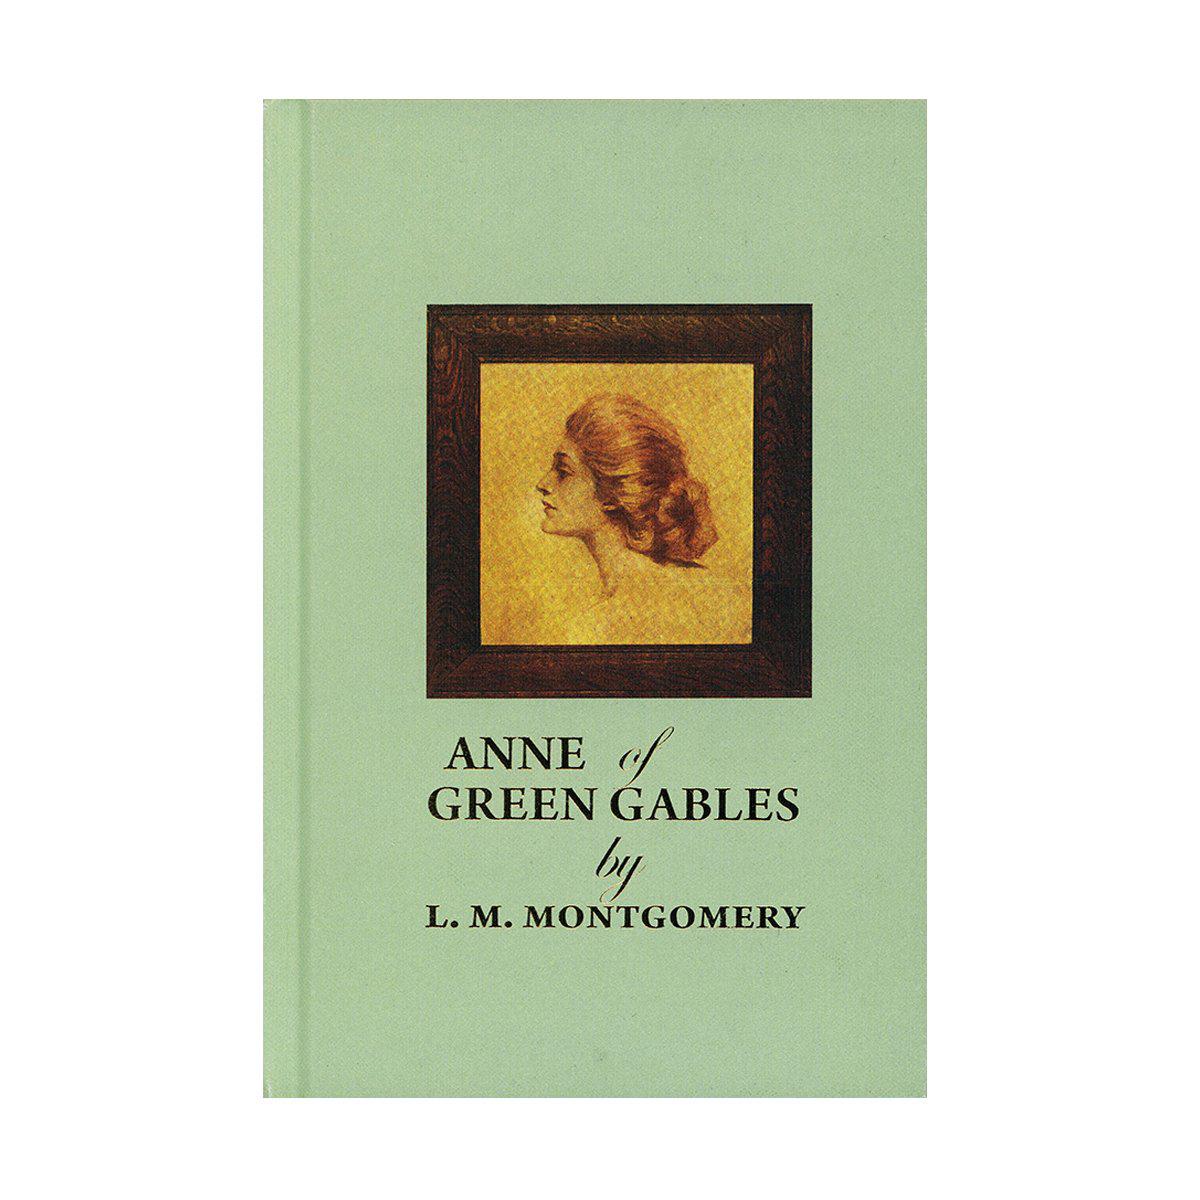 "Anne of Green Gables" Novel - Original Hardcover Edition L.C. Page & Co Boston 1908